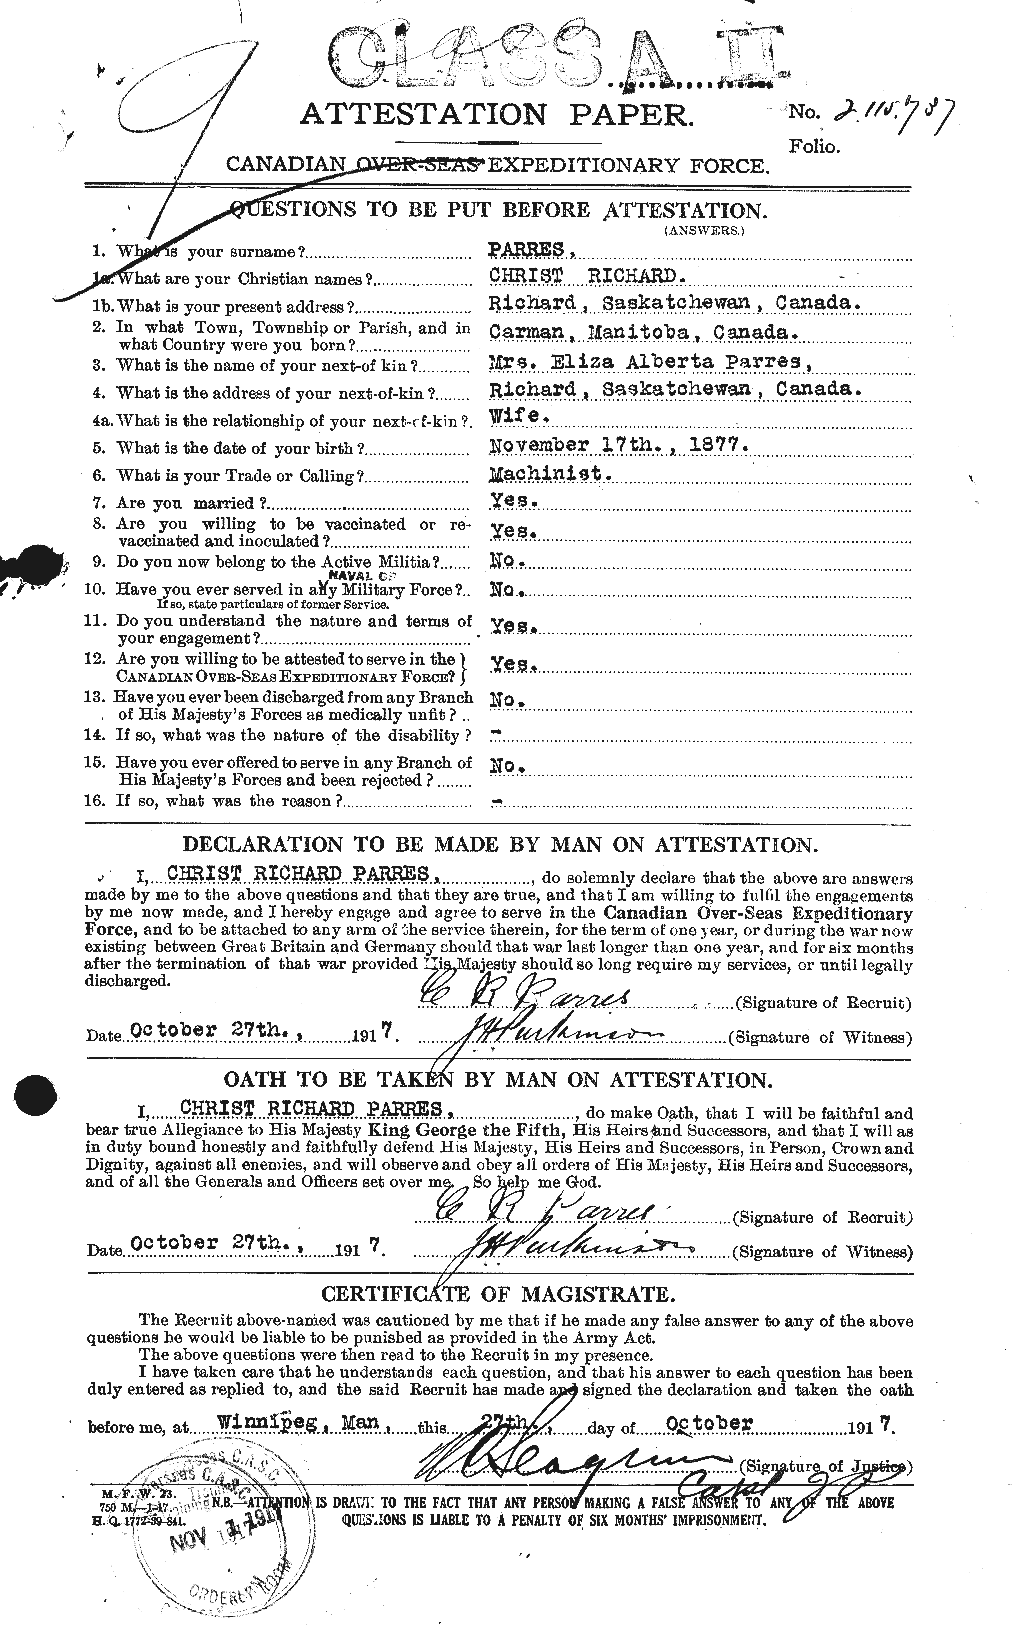 Personnel Records of the First World War - CEF 566466a